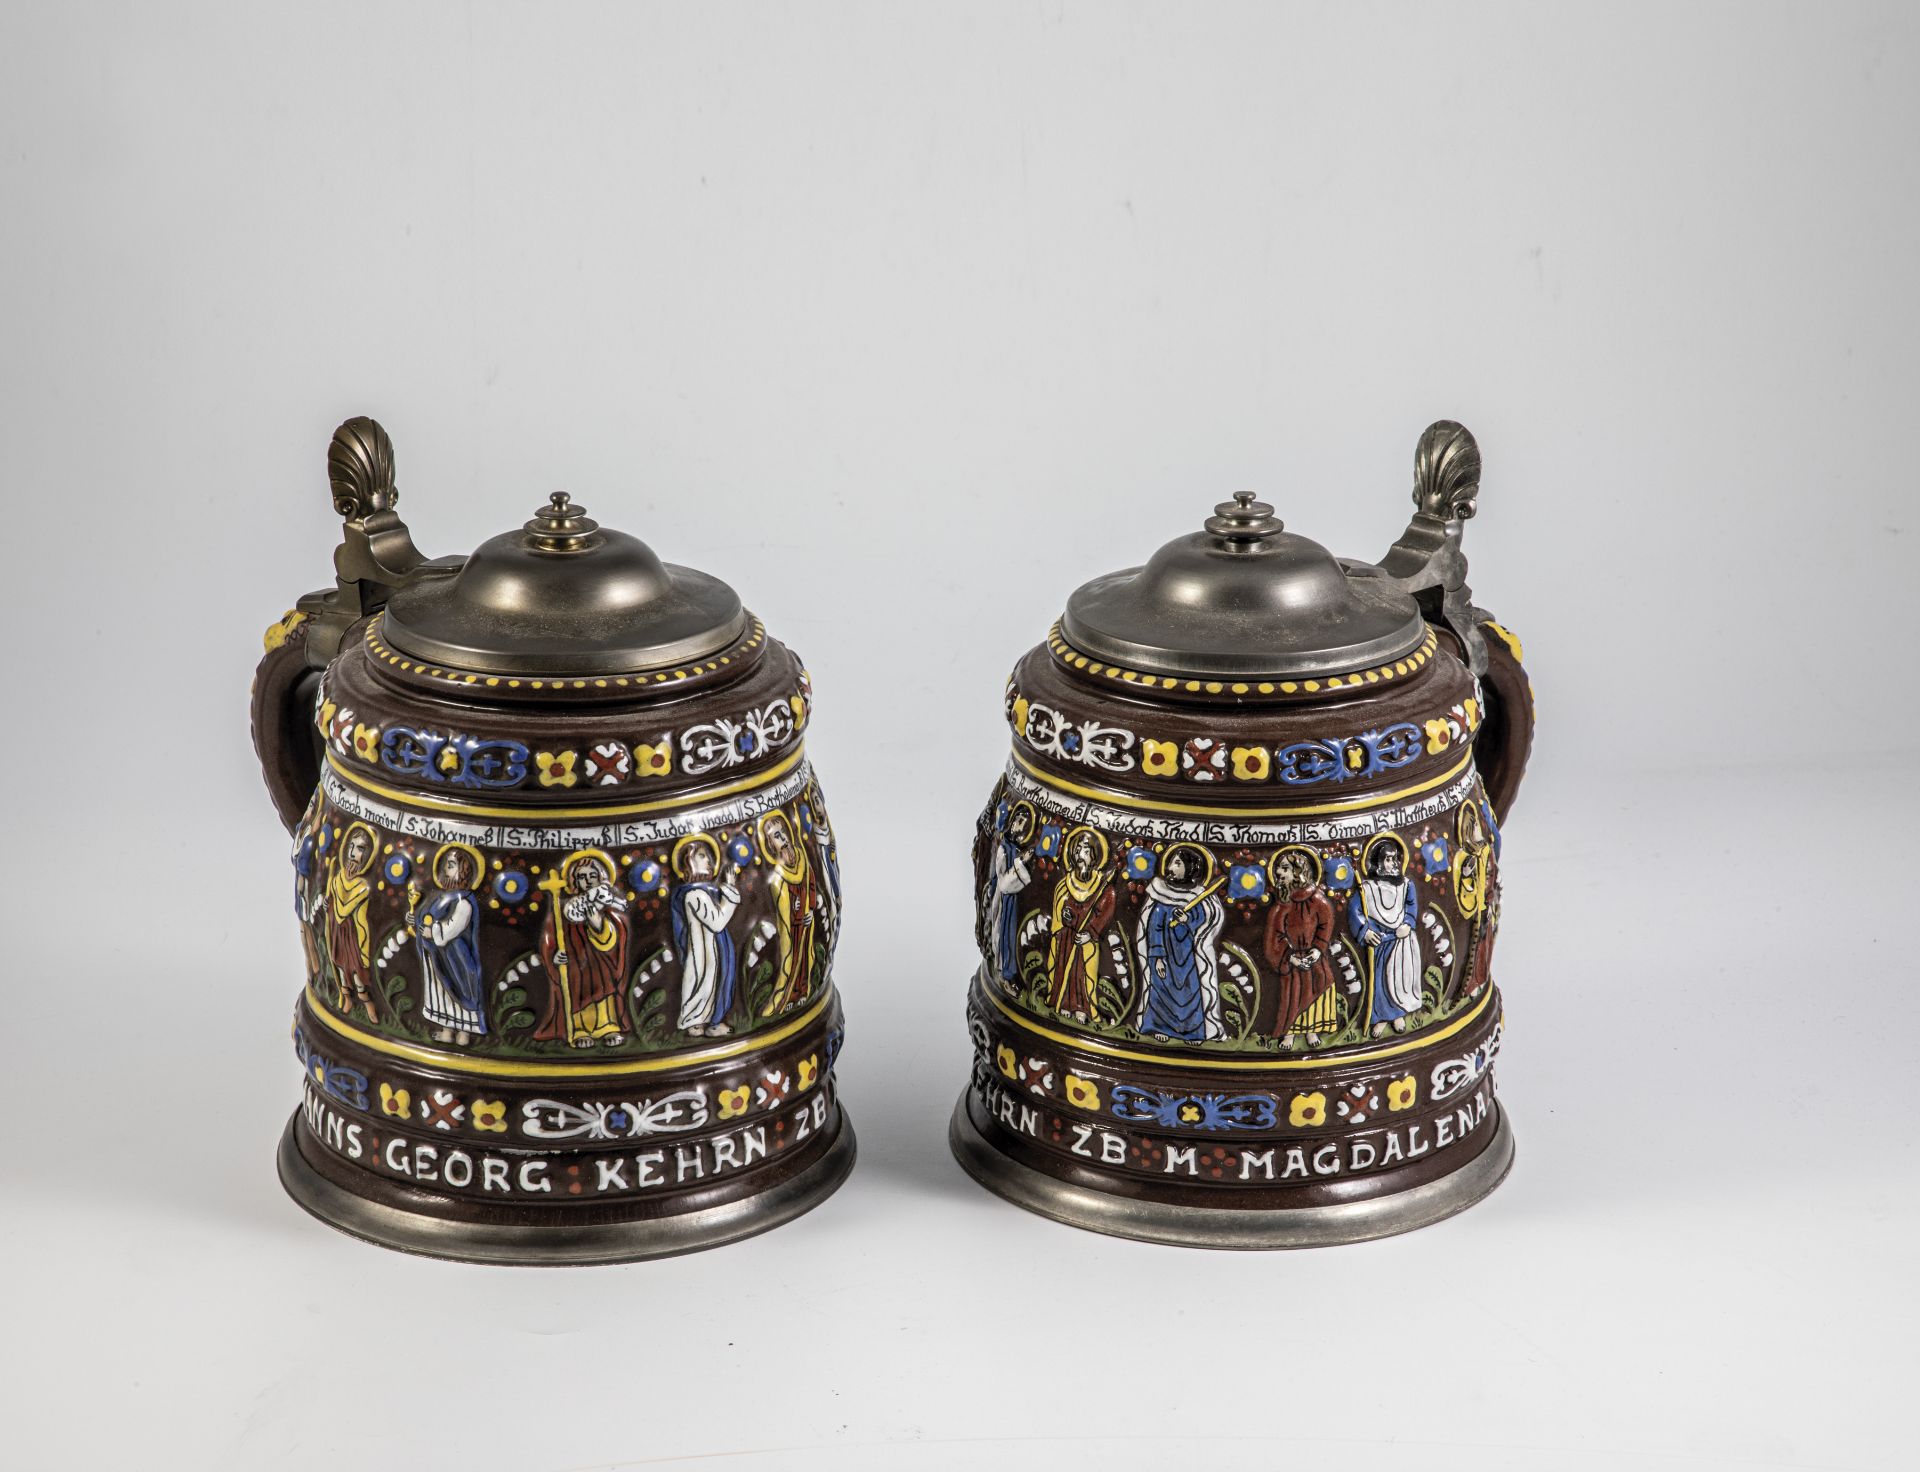 Pair of apostle jars with relief overlays